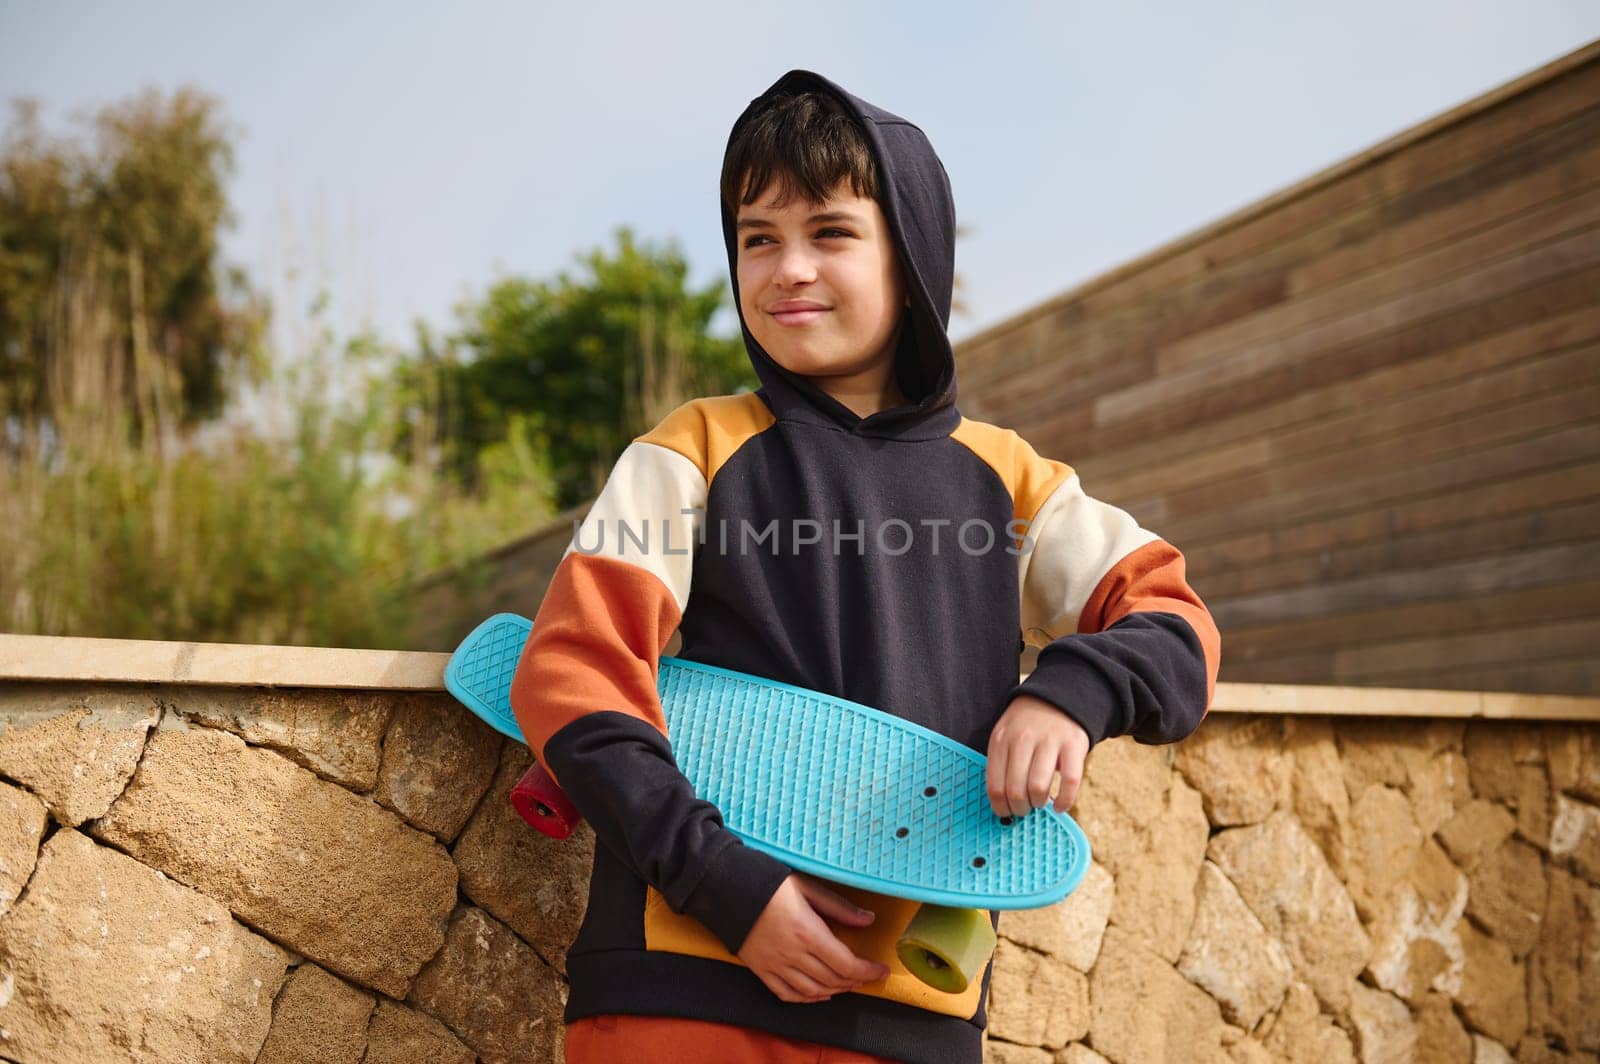 Lifestyle portrait of a teenager boy, hipster, skateboarder in trendy hoodie, holding his blue skateboard, smiling looking away, standing outdoors, against a stone wall background. Copy ad space